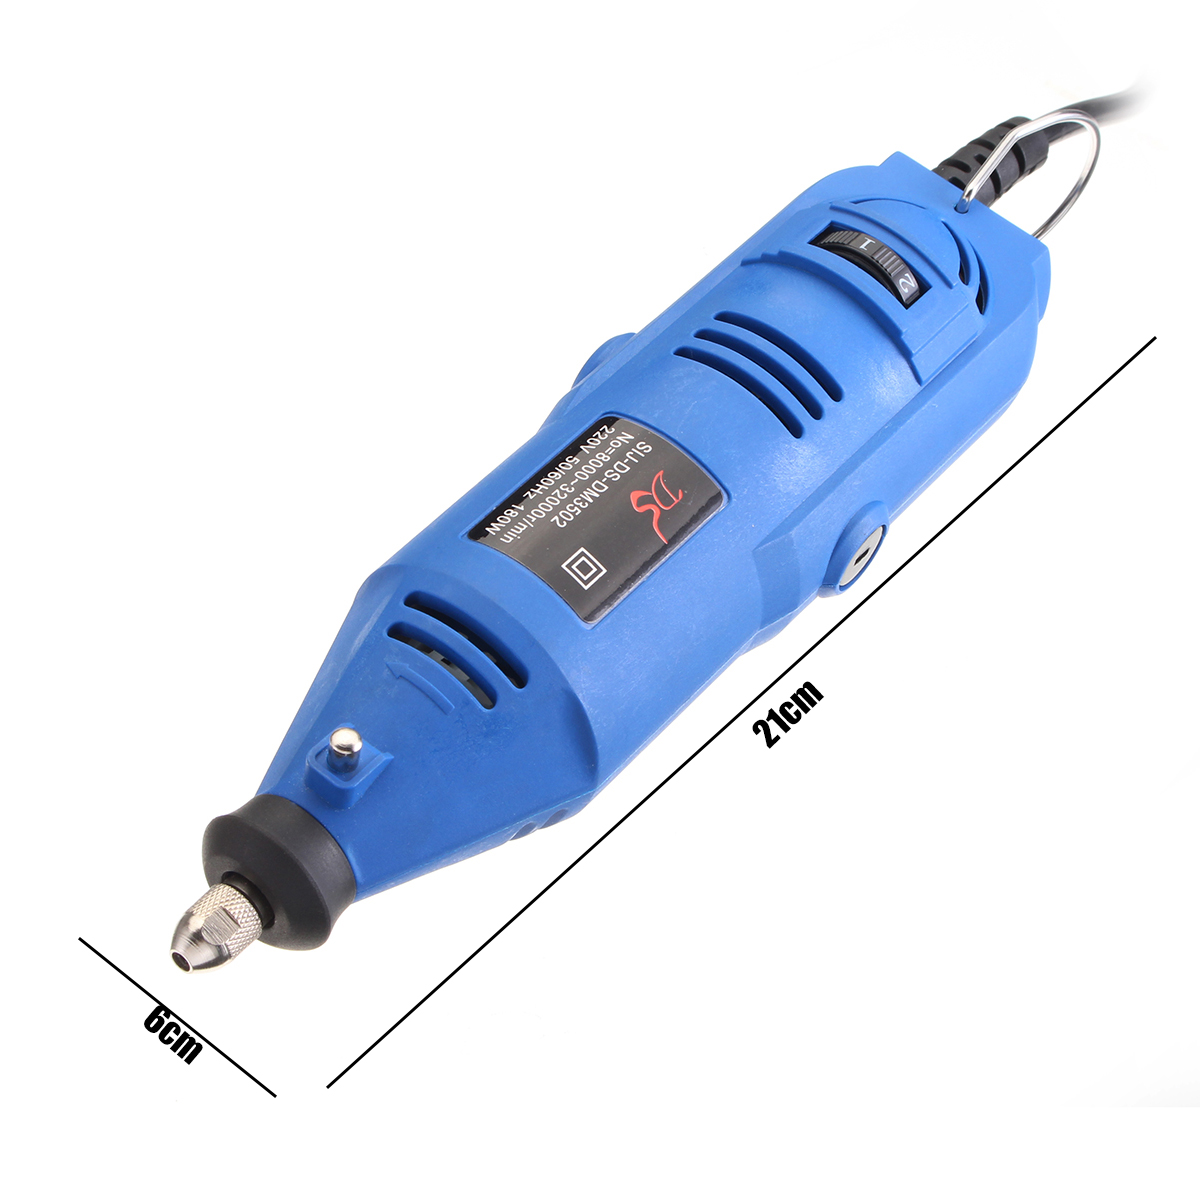 220V-Mini-Electric-Grinder-Rotary-Tool-Handle-Electric-Drill-Engraving-Pen-Grinder-Grinding-Machine-1249068-5